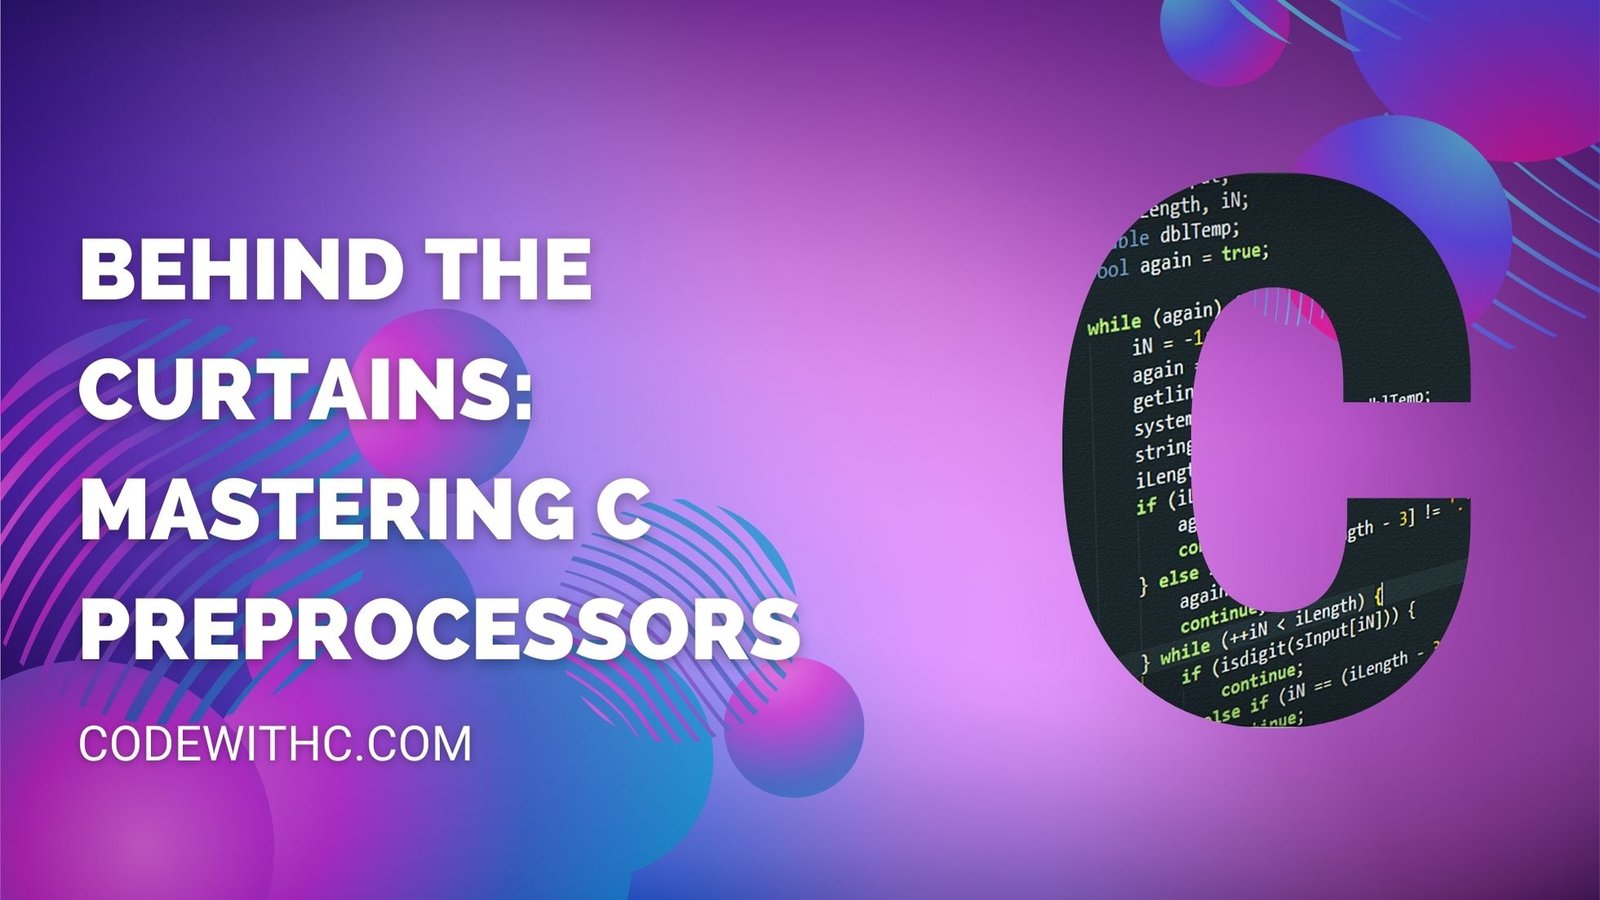 Behind the Curtains Mastering C Preprocessors